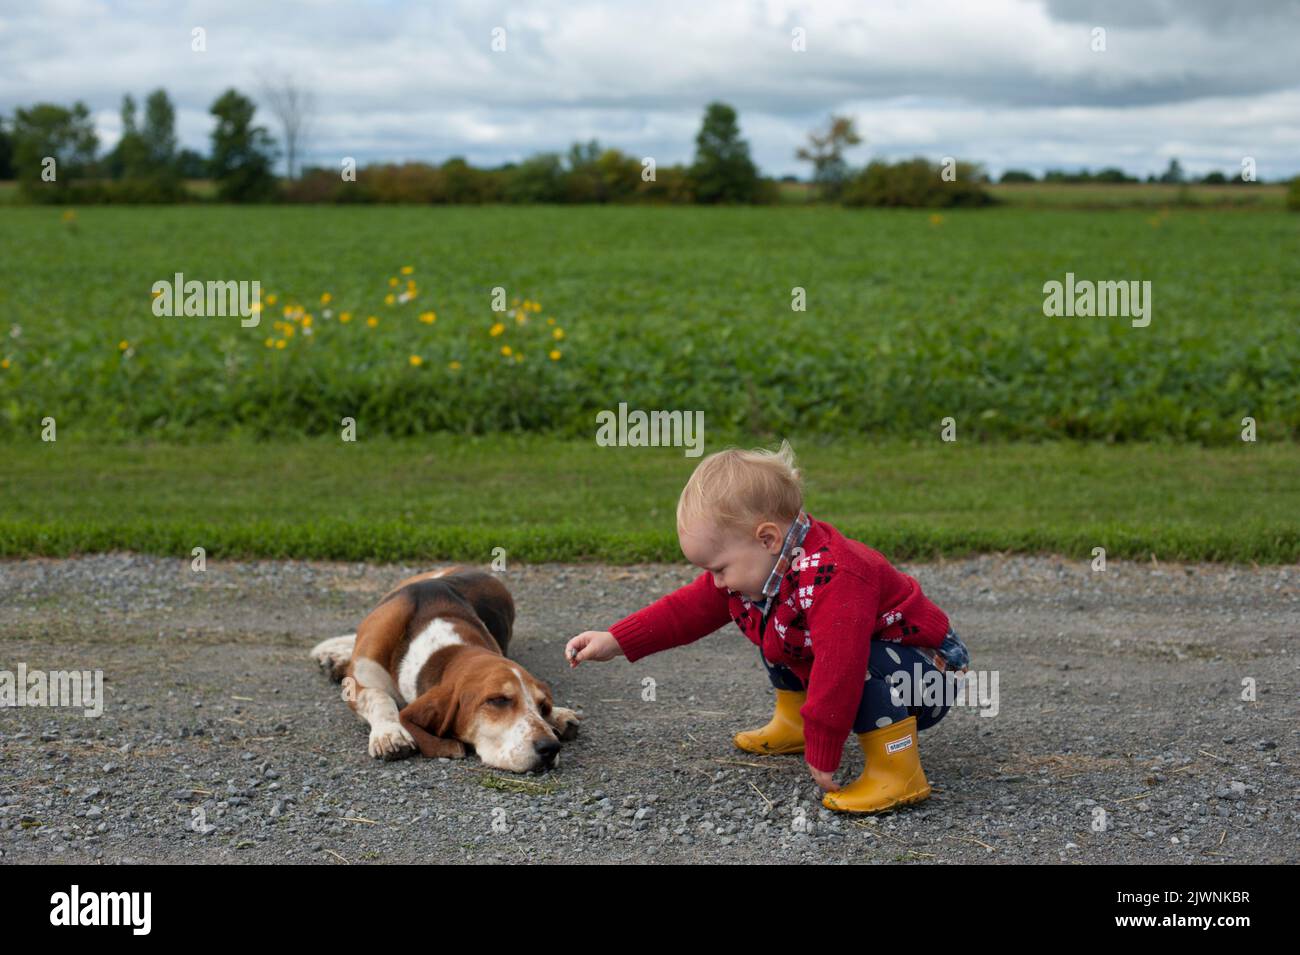 A toddler in rain boots pats a tired hound dog on a gravel driveway amidst country fields. Stock Photo